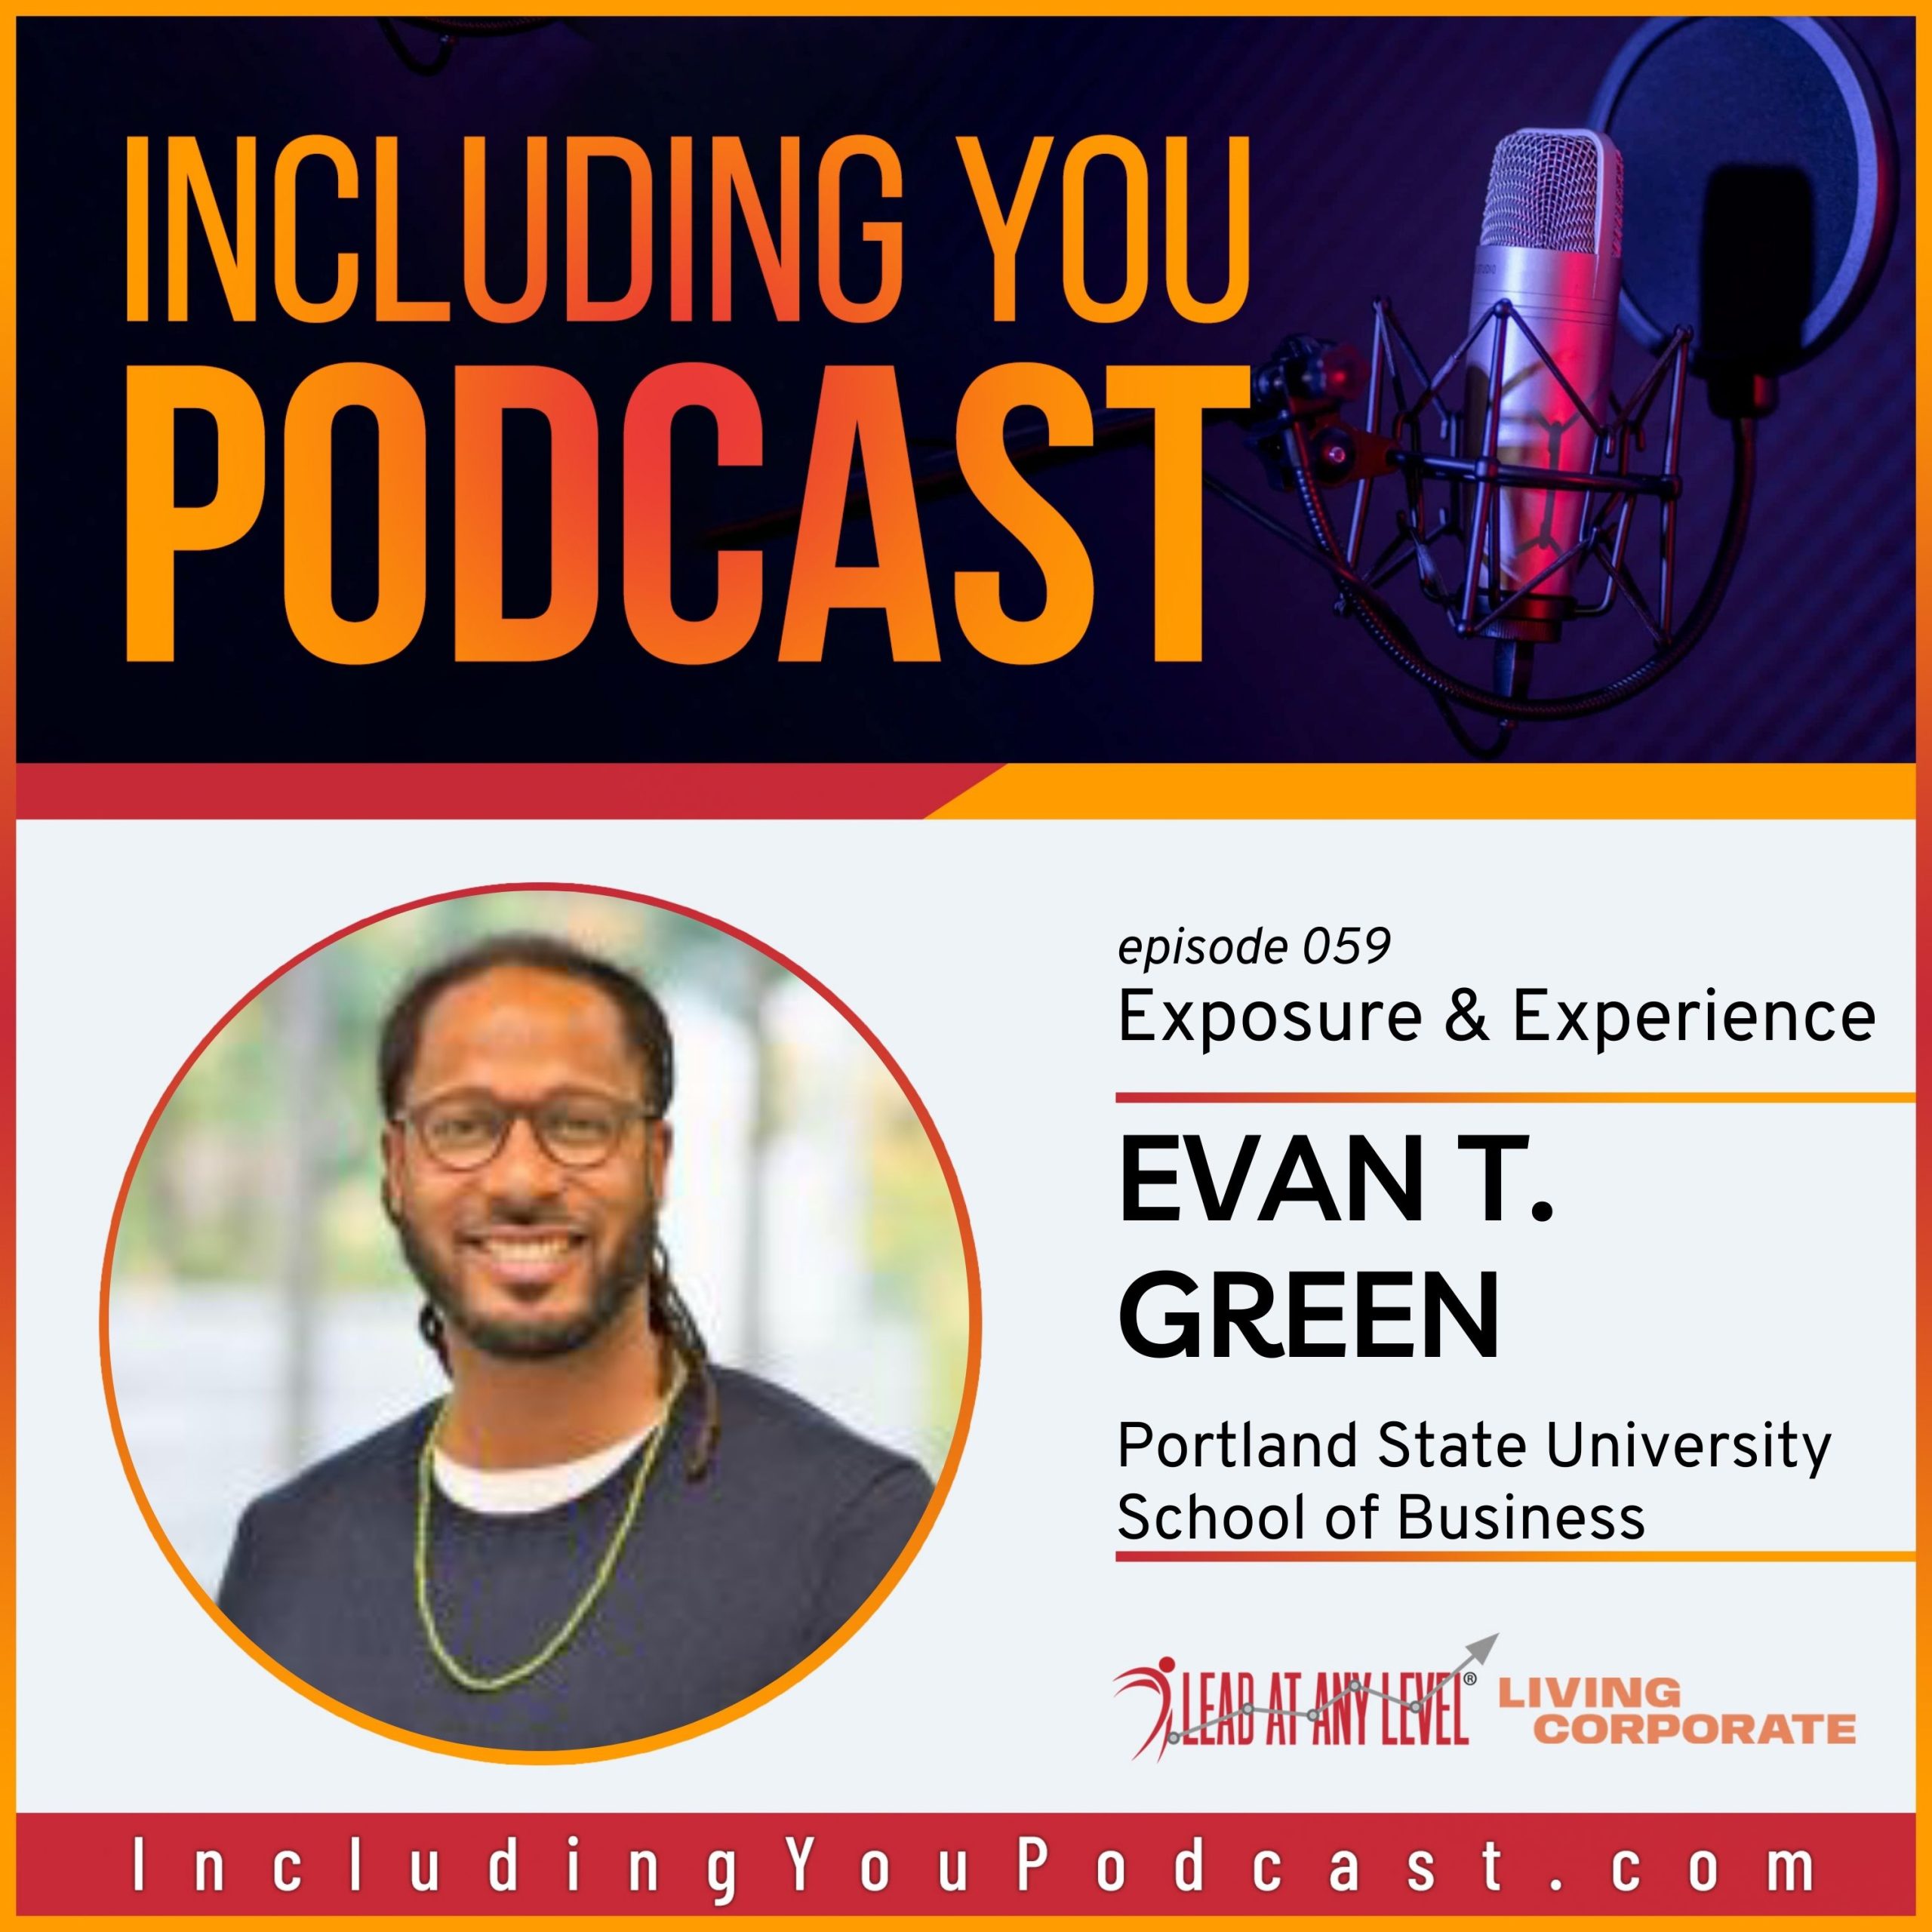 e059. Exposure & Experience with Evan T. Green